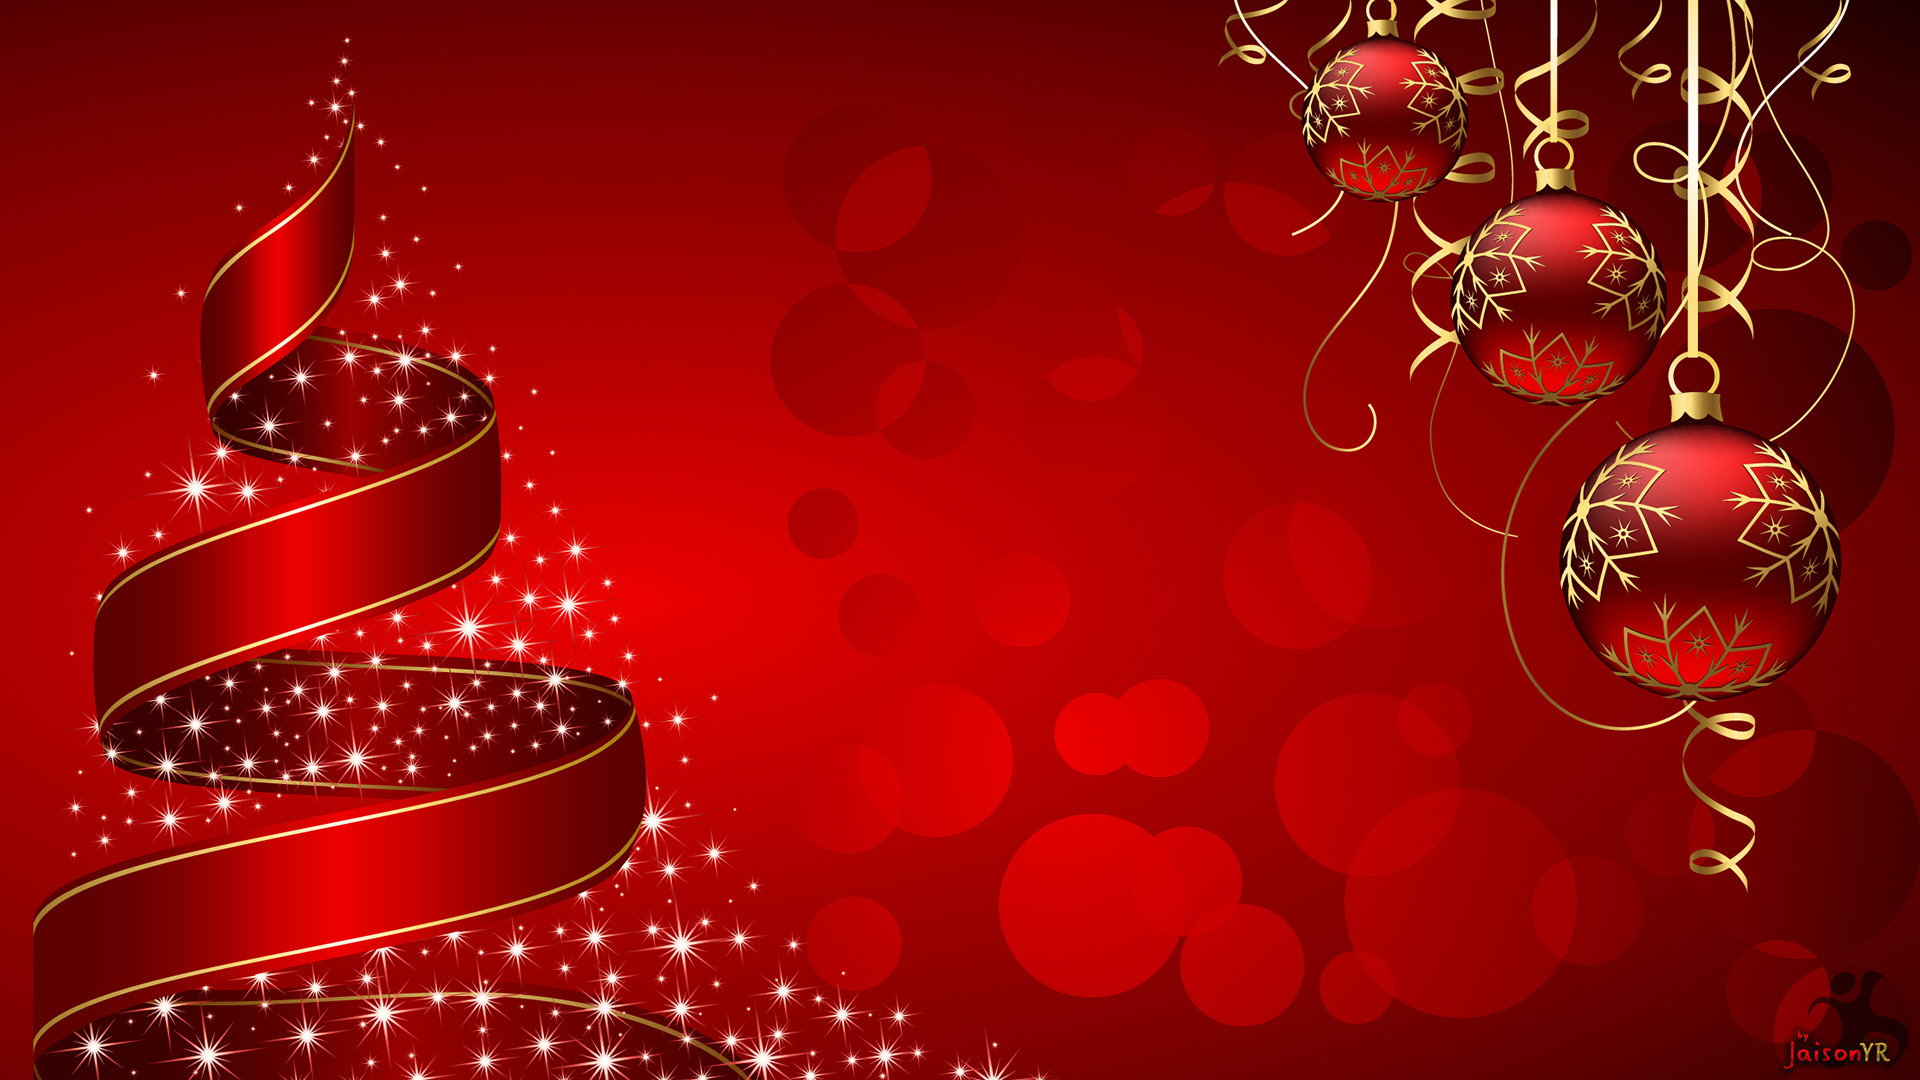 1920x1080 Christmas Background Pictures